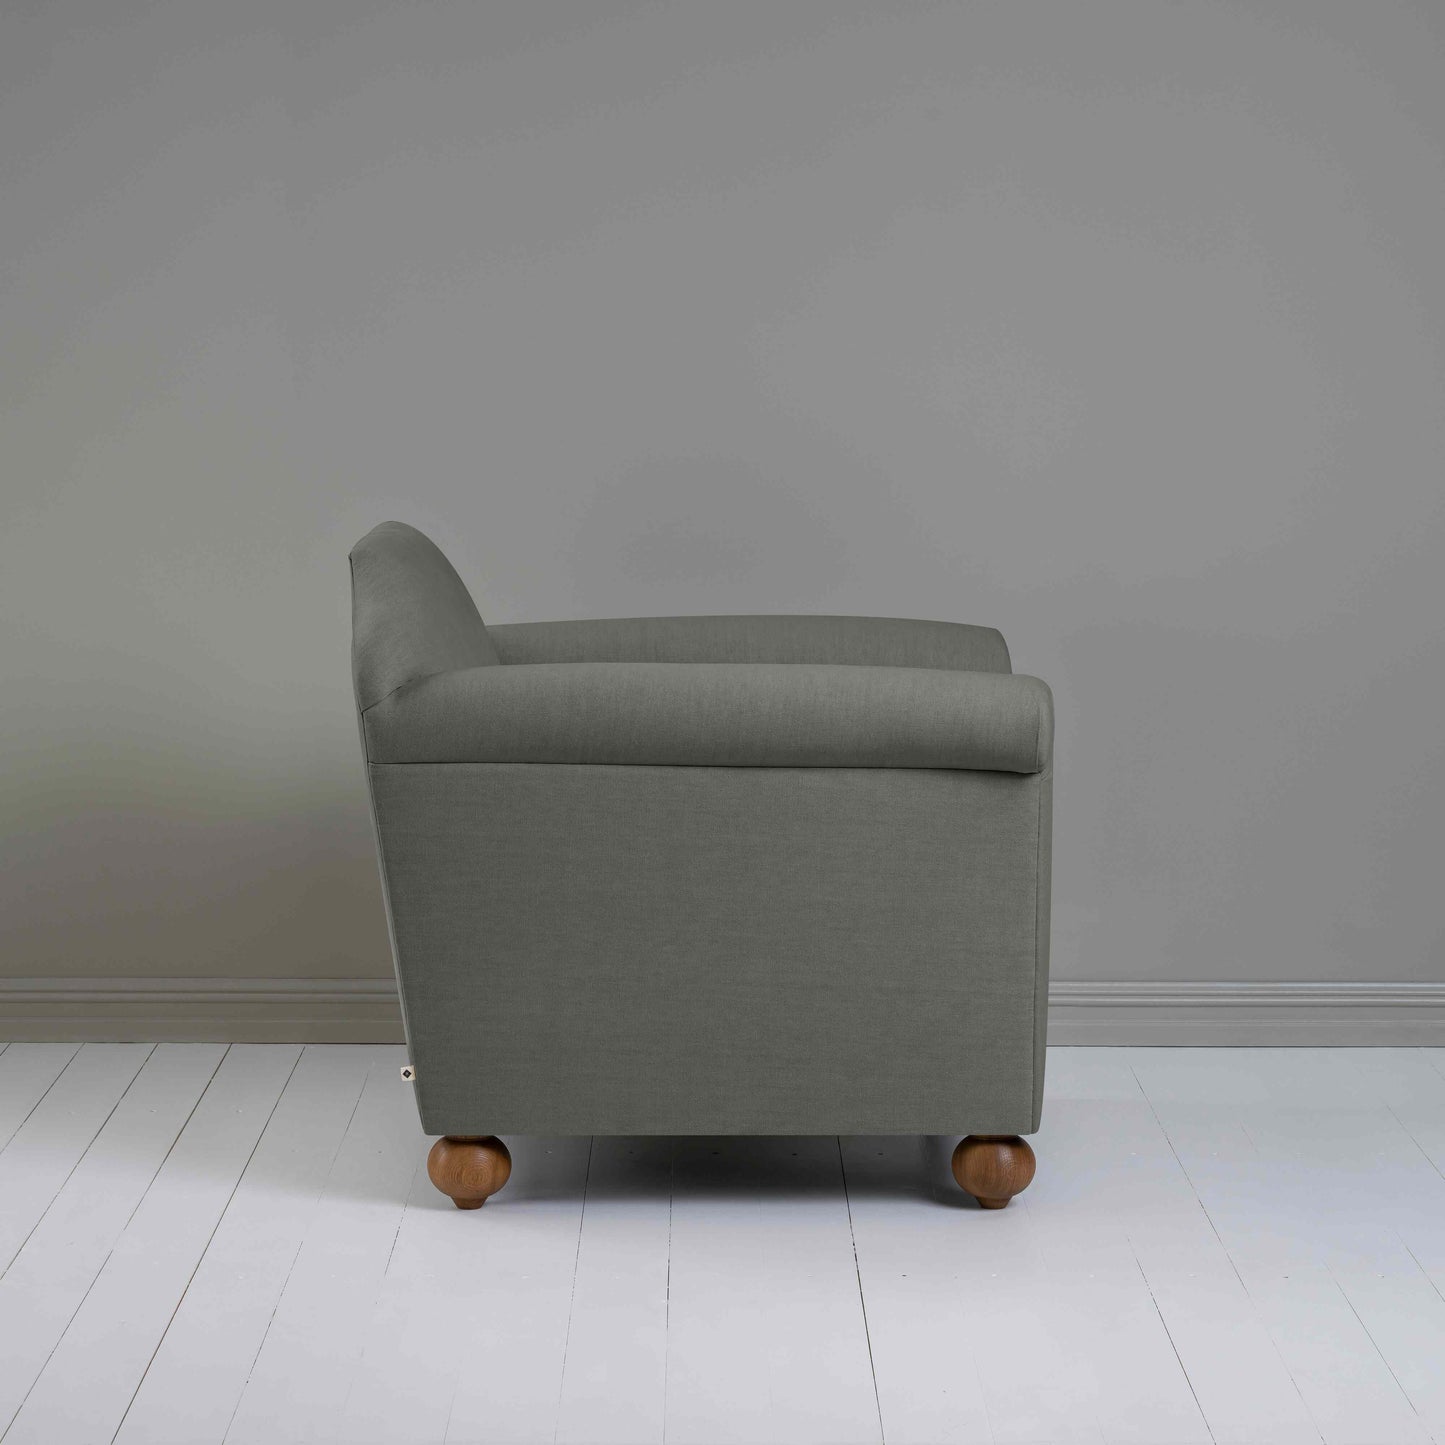 Dolittle Armchair in Laidback Linen Shadow